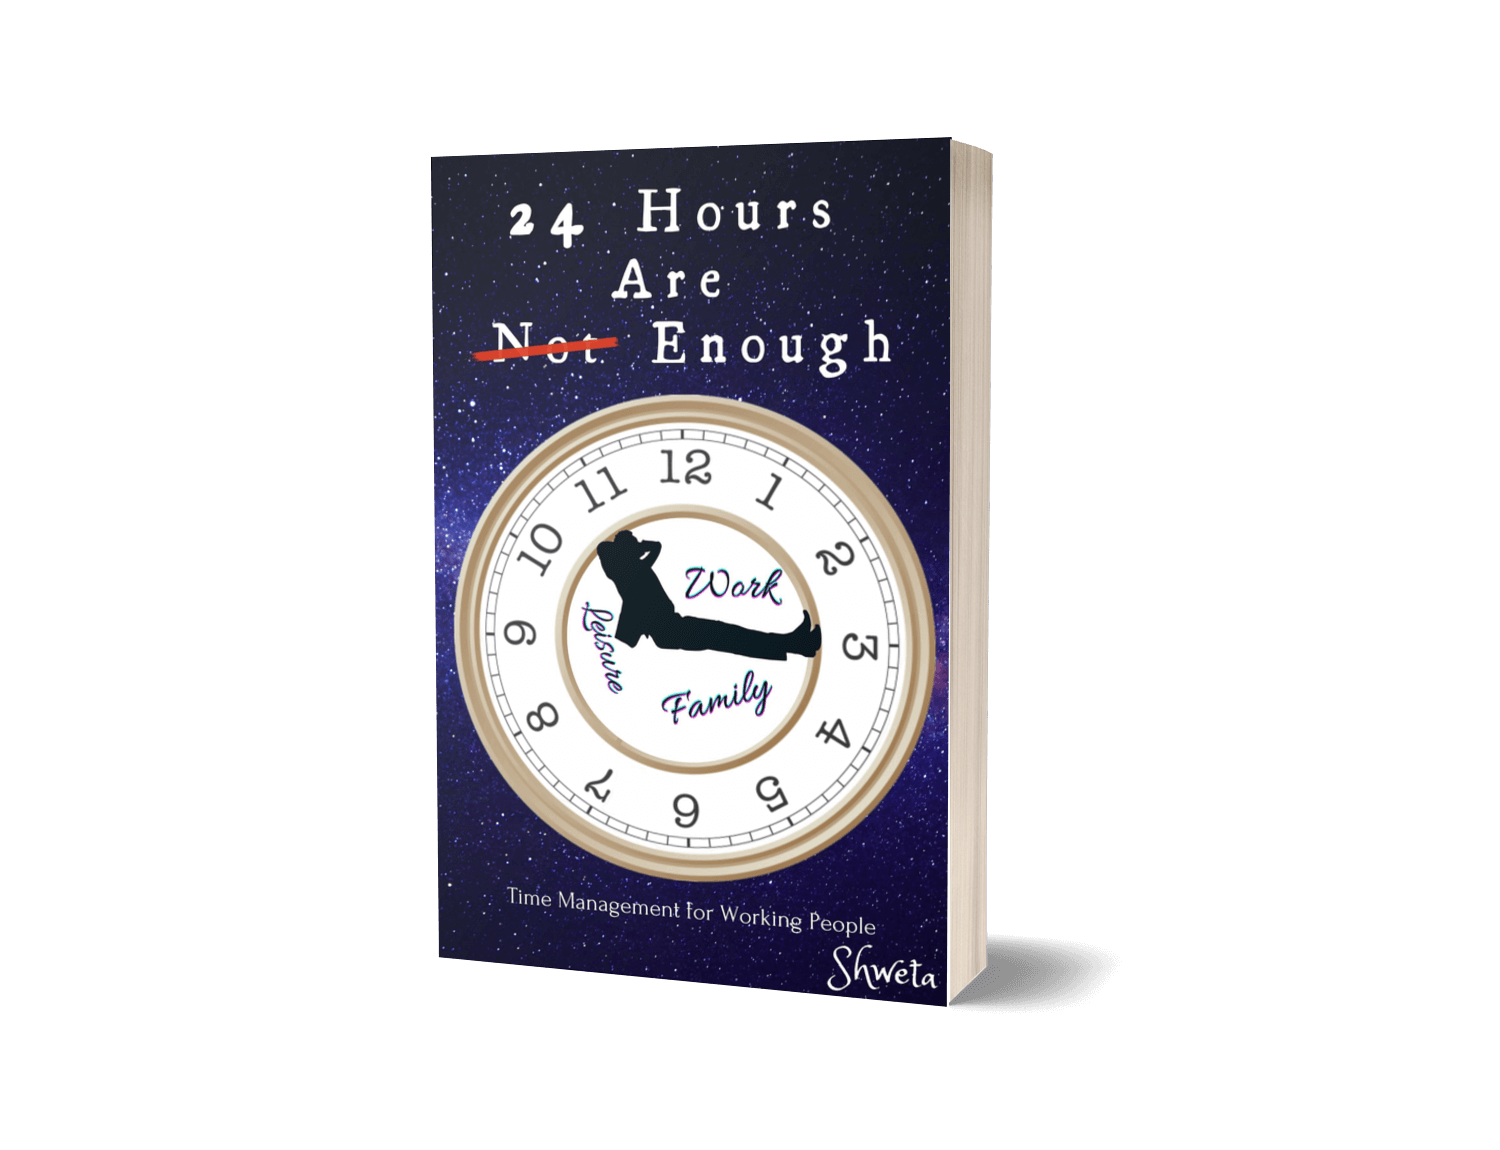 Time management book - 24 Hours are Enough